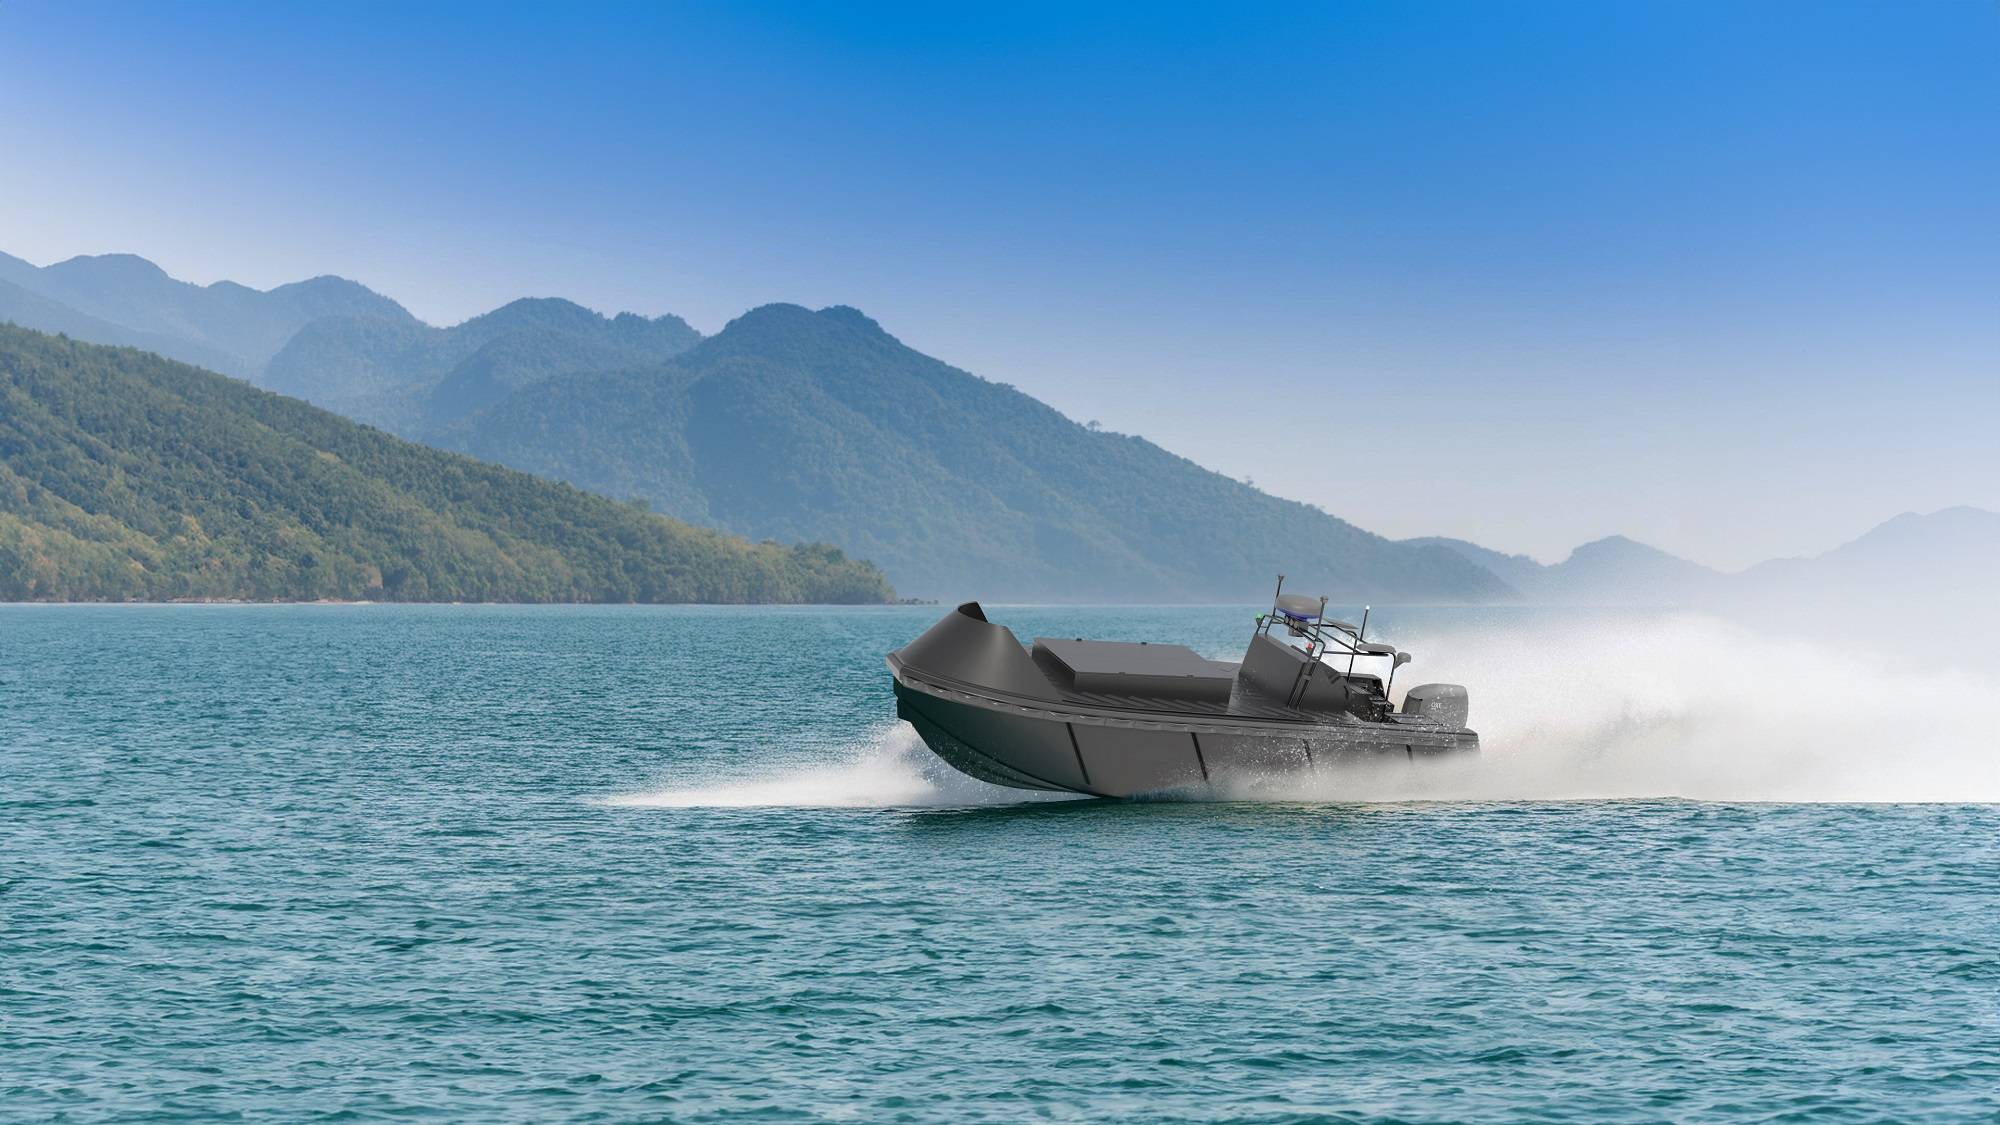 U.S.-based Sea Machines Robotics has launched a new unmanned surface vessel (USV) for marine exploration and operations.